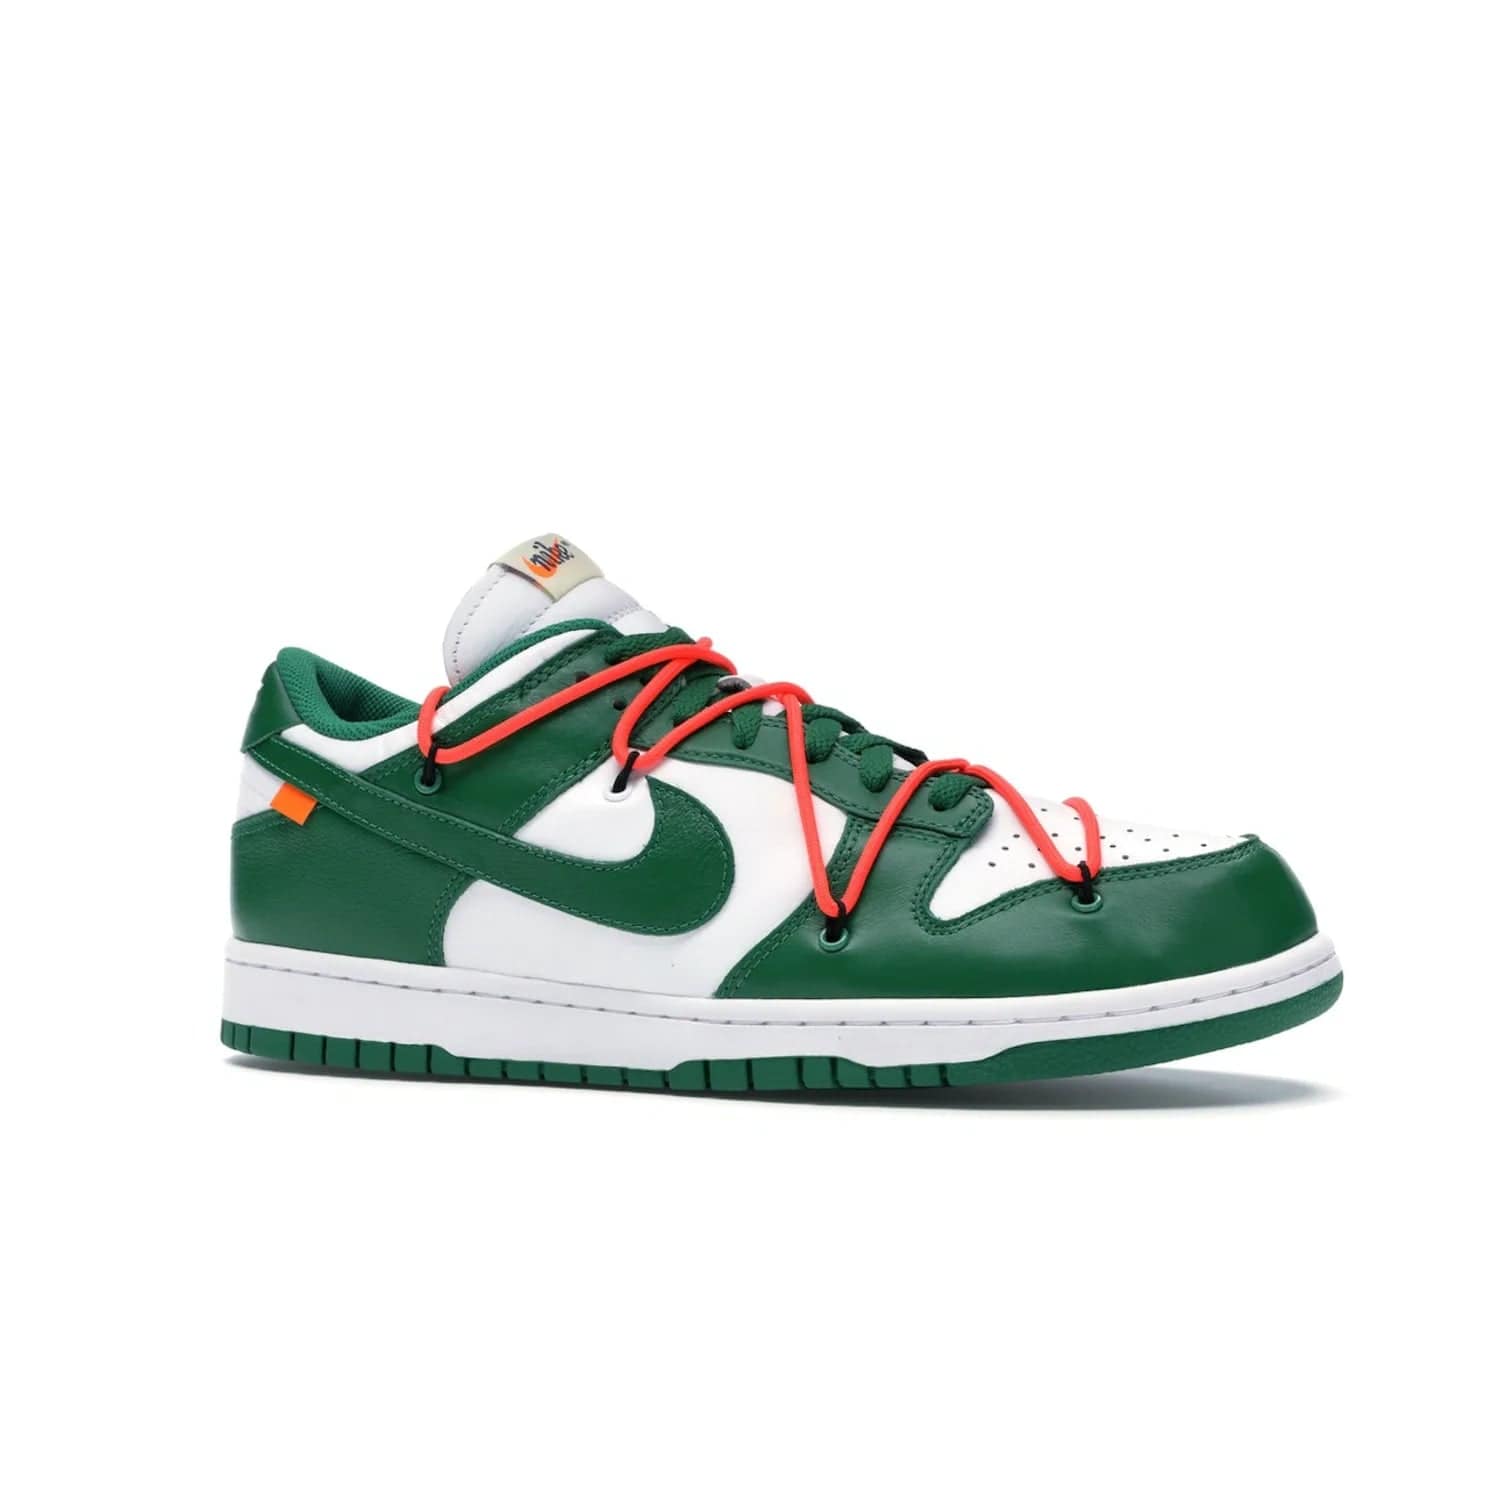 Nike Dunk Low Off-White Pine Green - Image 3 - Only at www.BallersClubKickz.com - The Nike Dunk Low Off-White Pine Green combines classic 1980s style with modern-day design. Featuring white leather uppers and pine green overlays, these classic kicks feature secondary lacing system, zip-ties and signature Off-White text. Releasing in December 2019, these shoes are a timeless classic for any wardrobe.